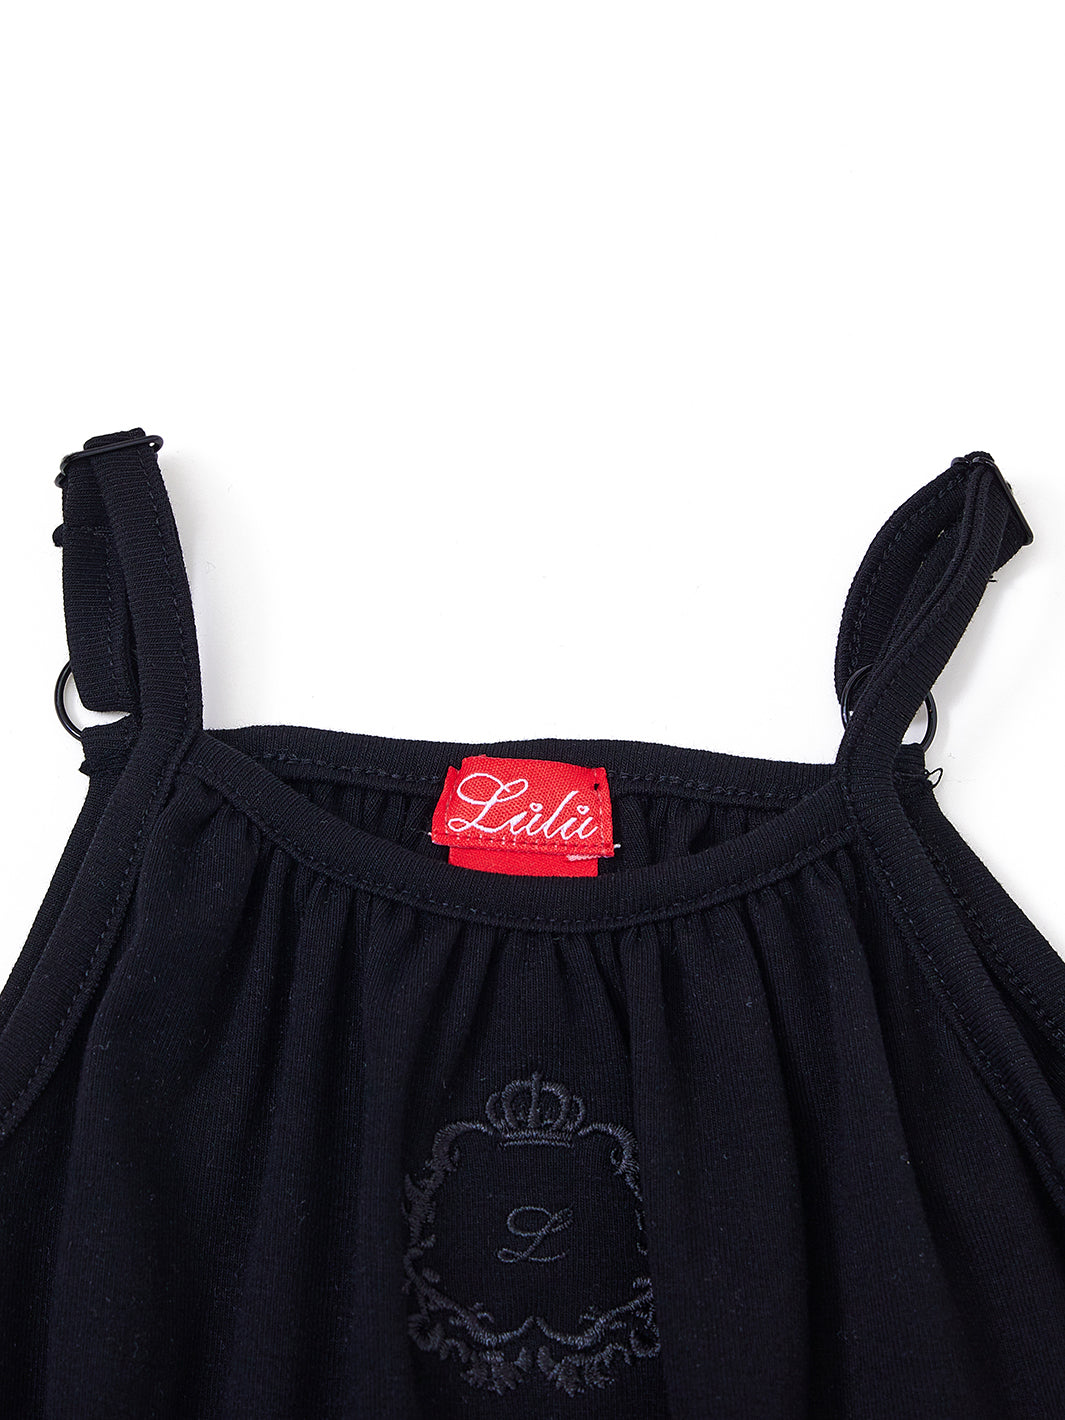 Baby Gathered Emblem Overall - Black